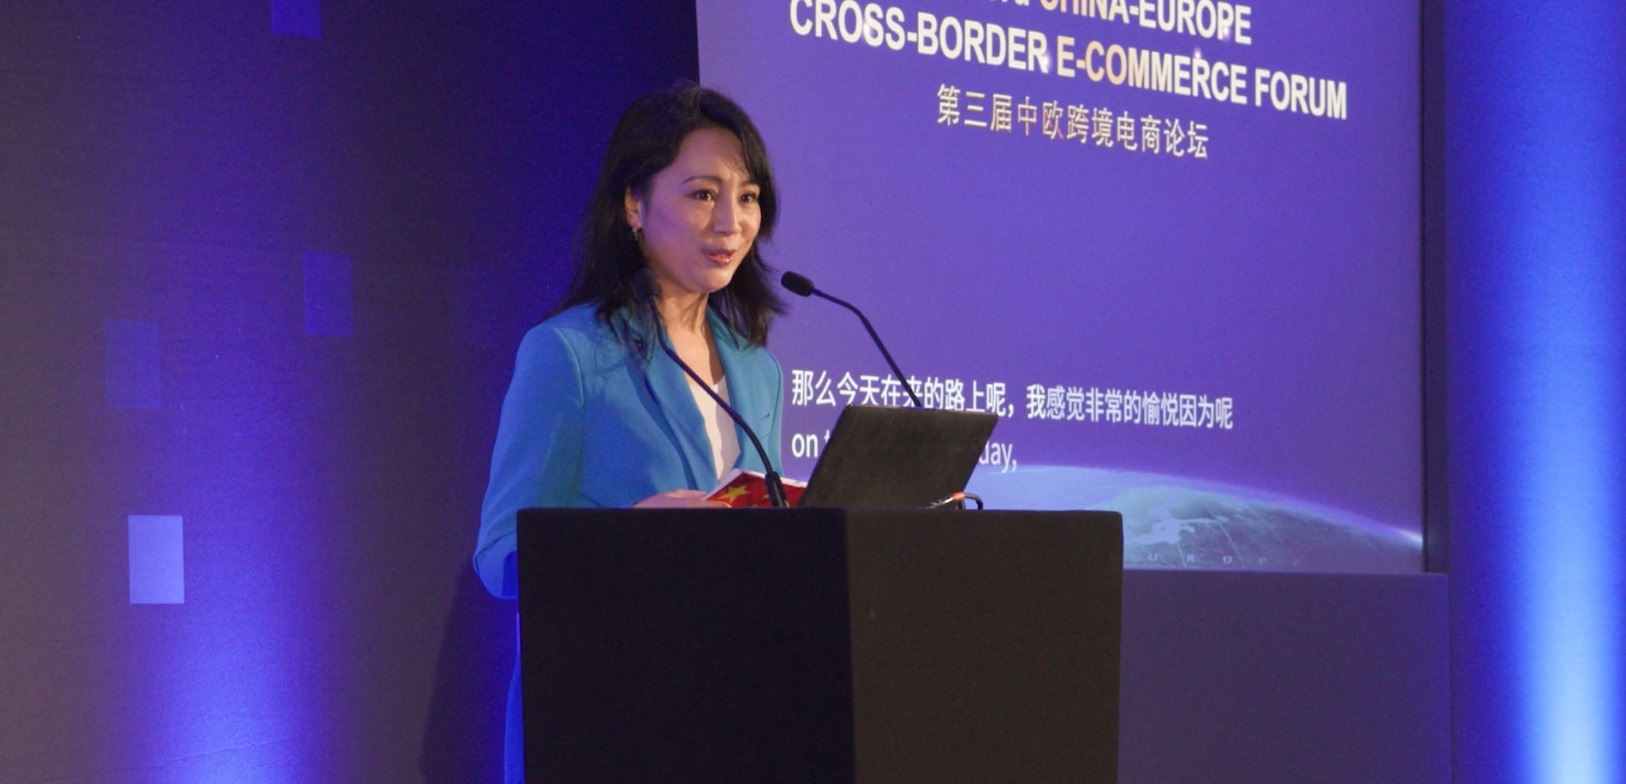 The annual China/Europe Cross Border E-Commerce Forum is taking place in Manchester this week, where are a host of startups are hoping to find out how to expand their businesses into the Chinese market./CGTN.